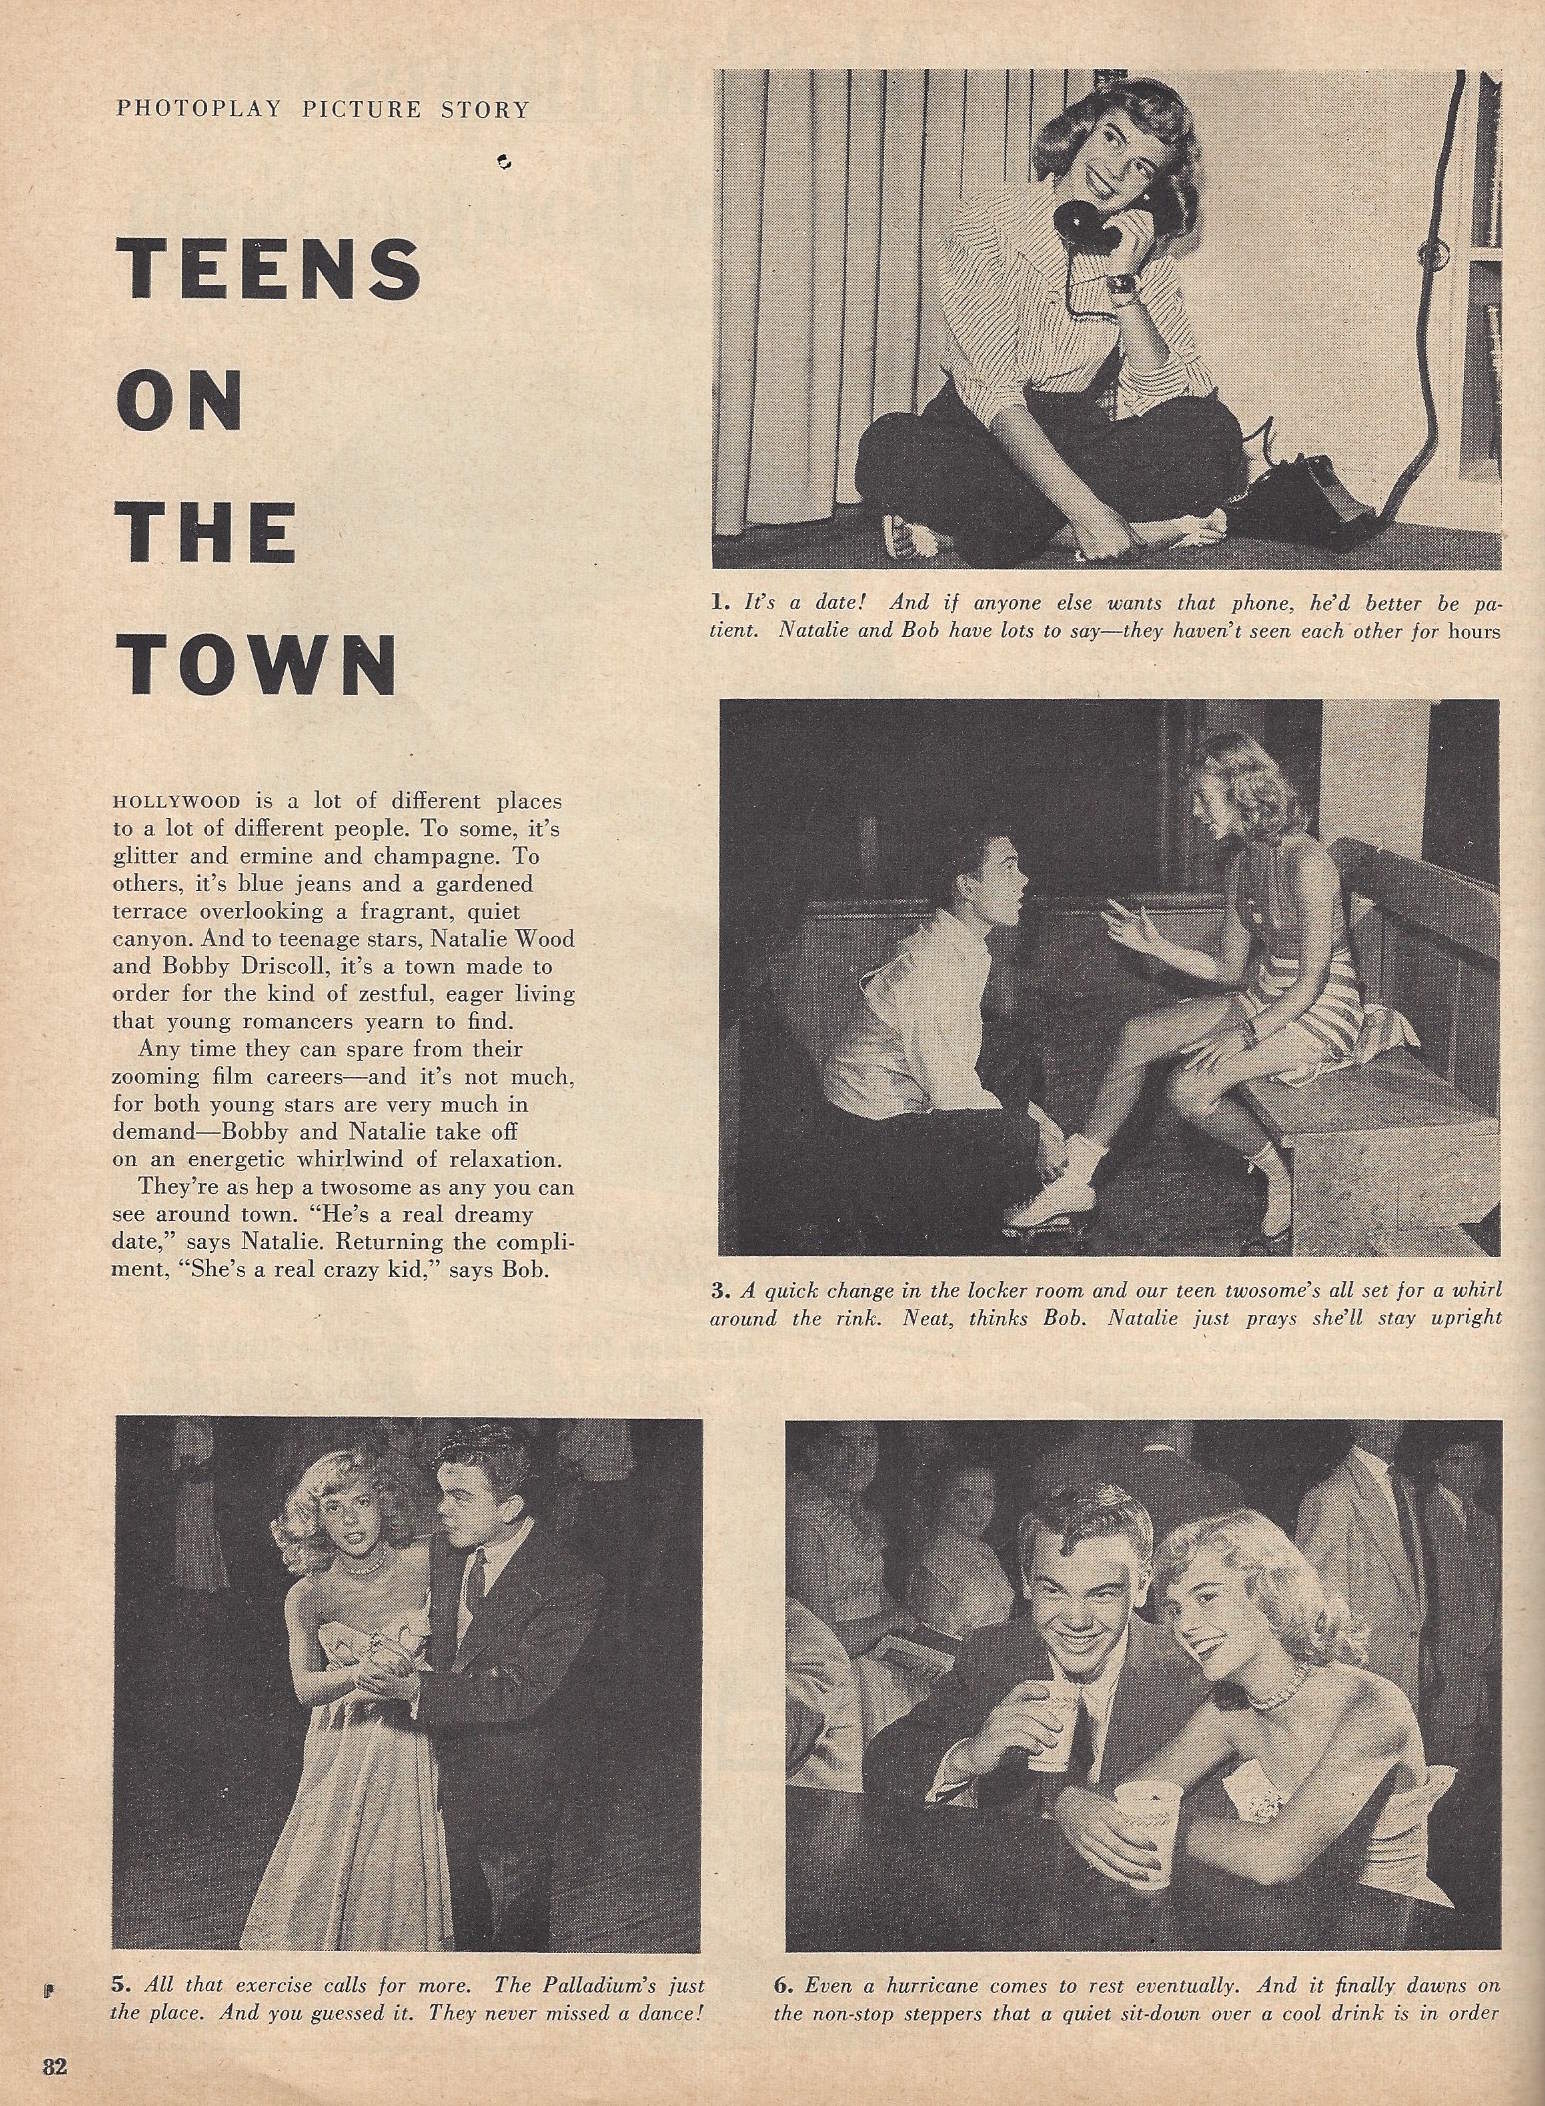 Teens on the Town (October 1953)